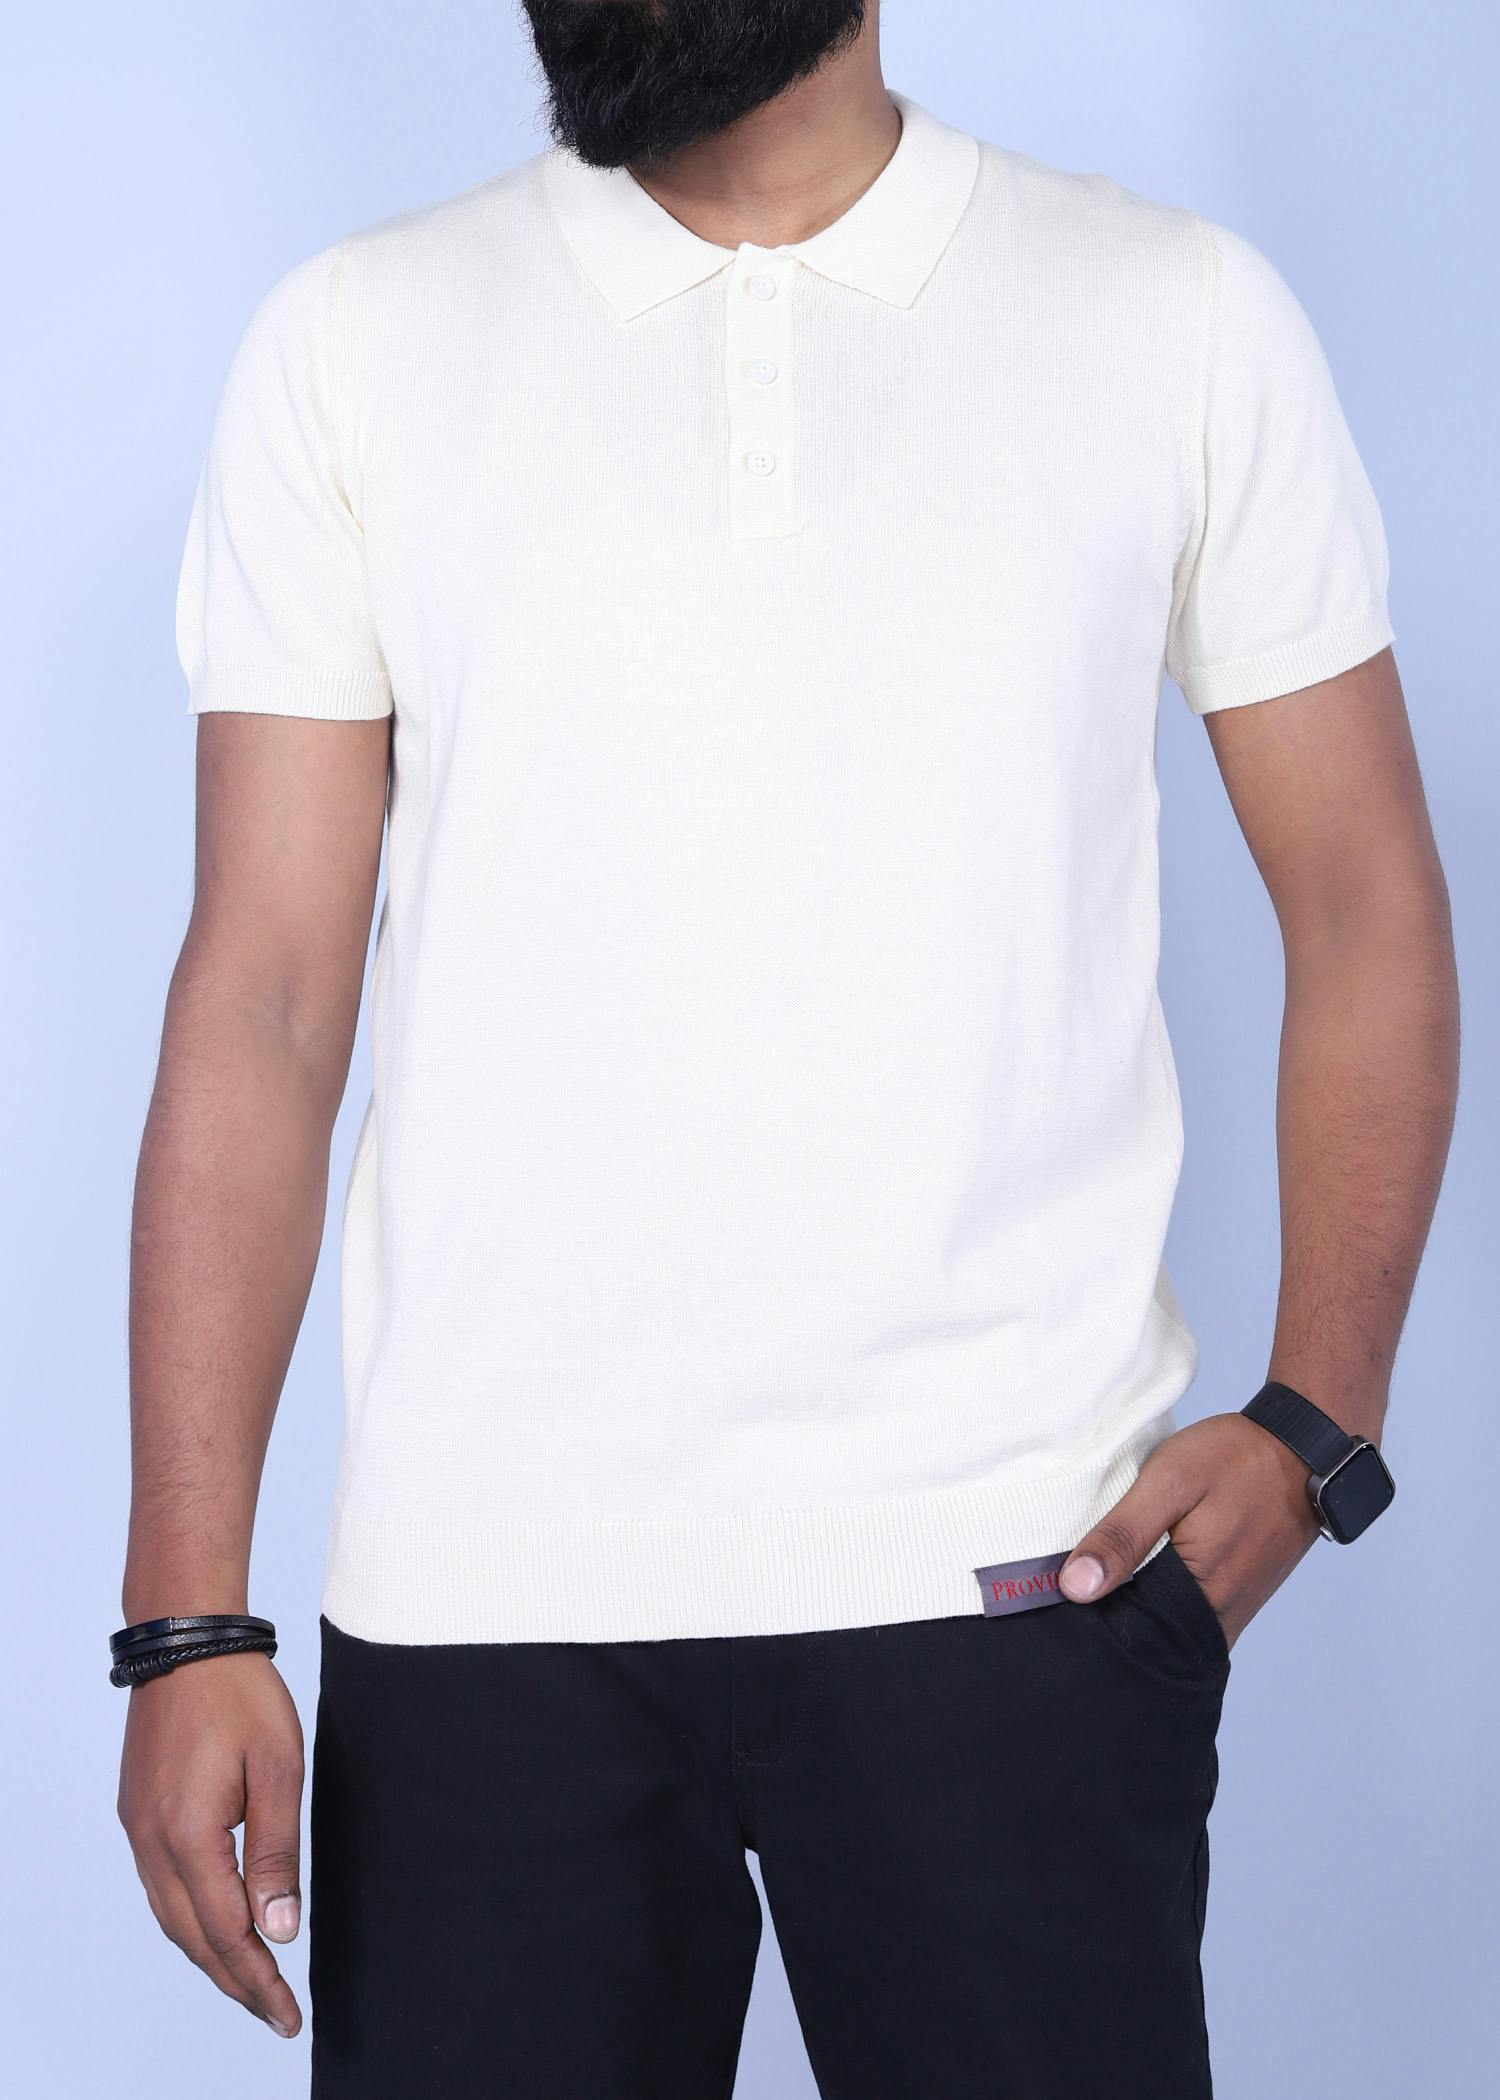 nightingale viii polo off white color half front view